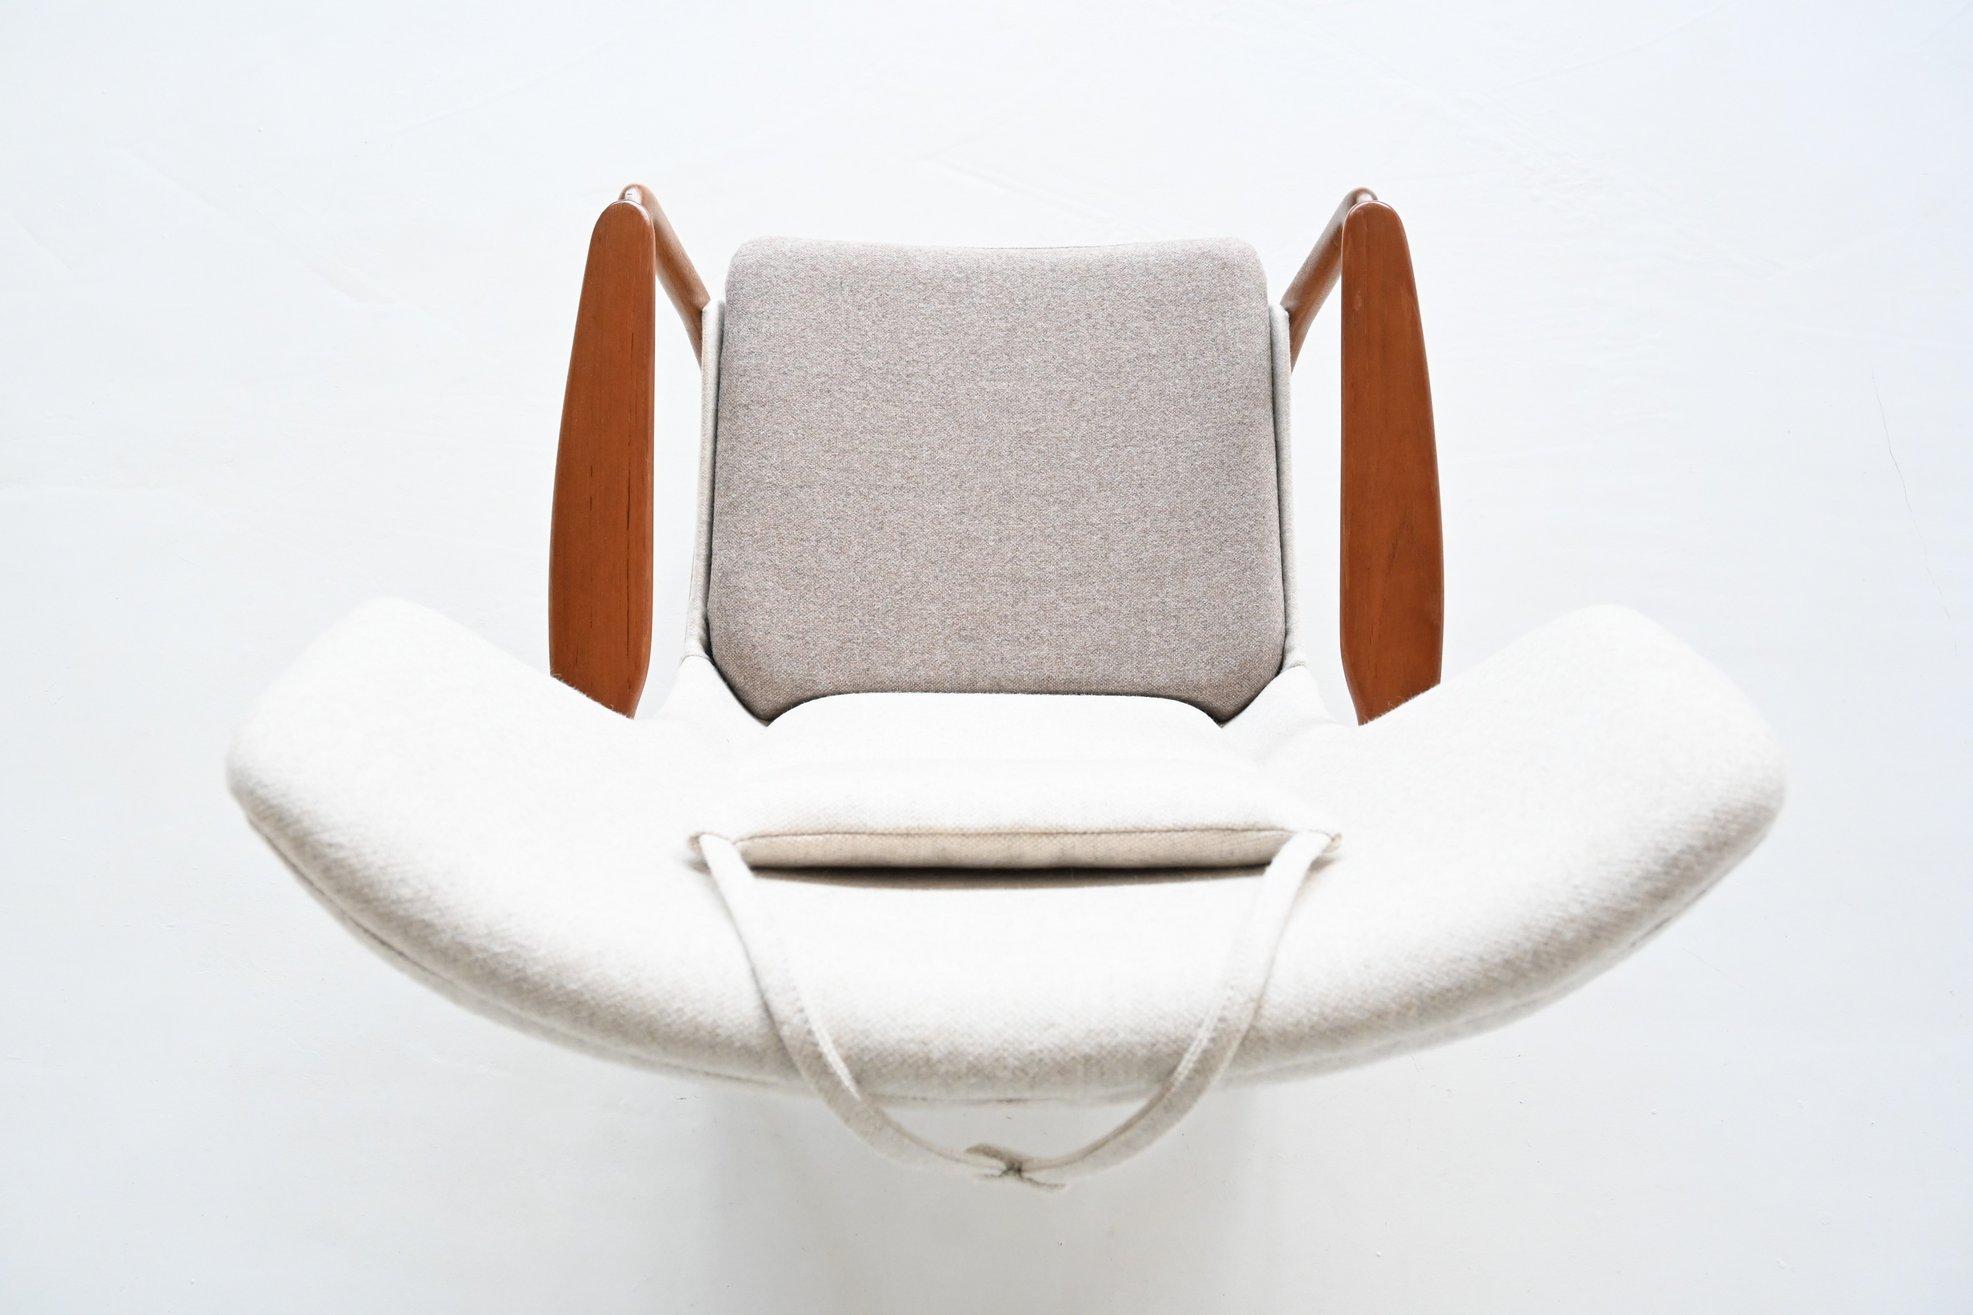 Madsen & H. Schubell Wingback Lounge Chair Bovenkamp the Netherlands, 1960 10